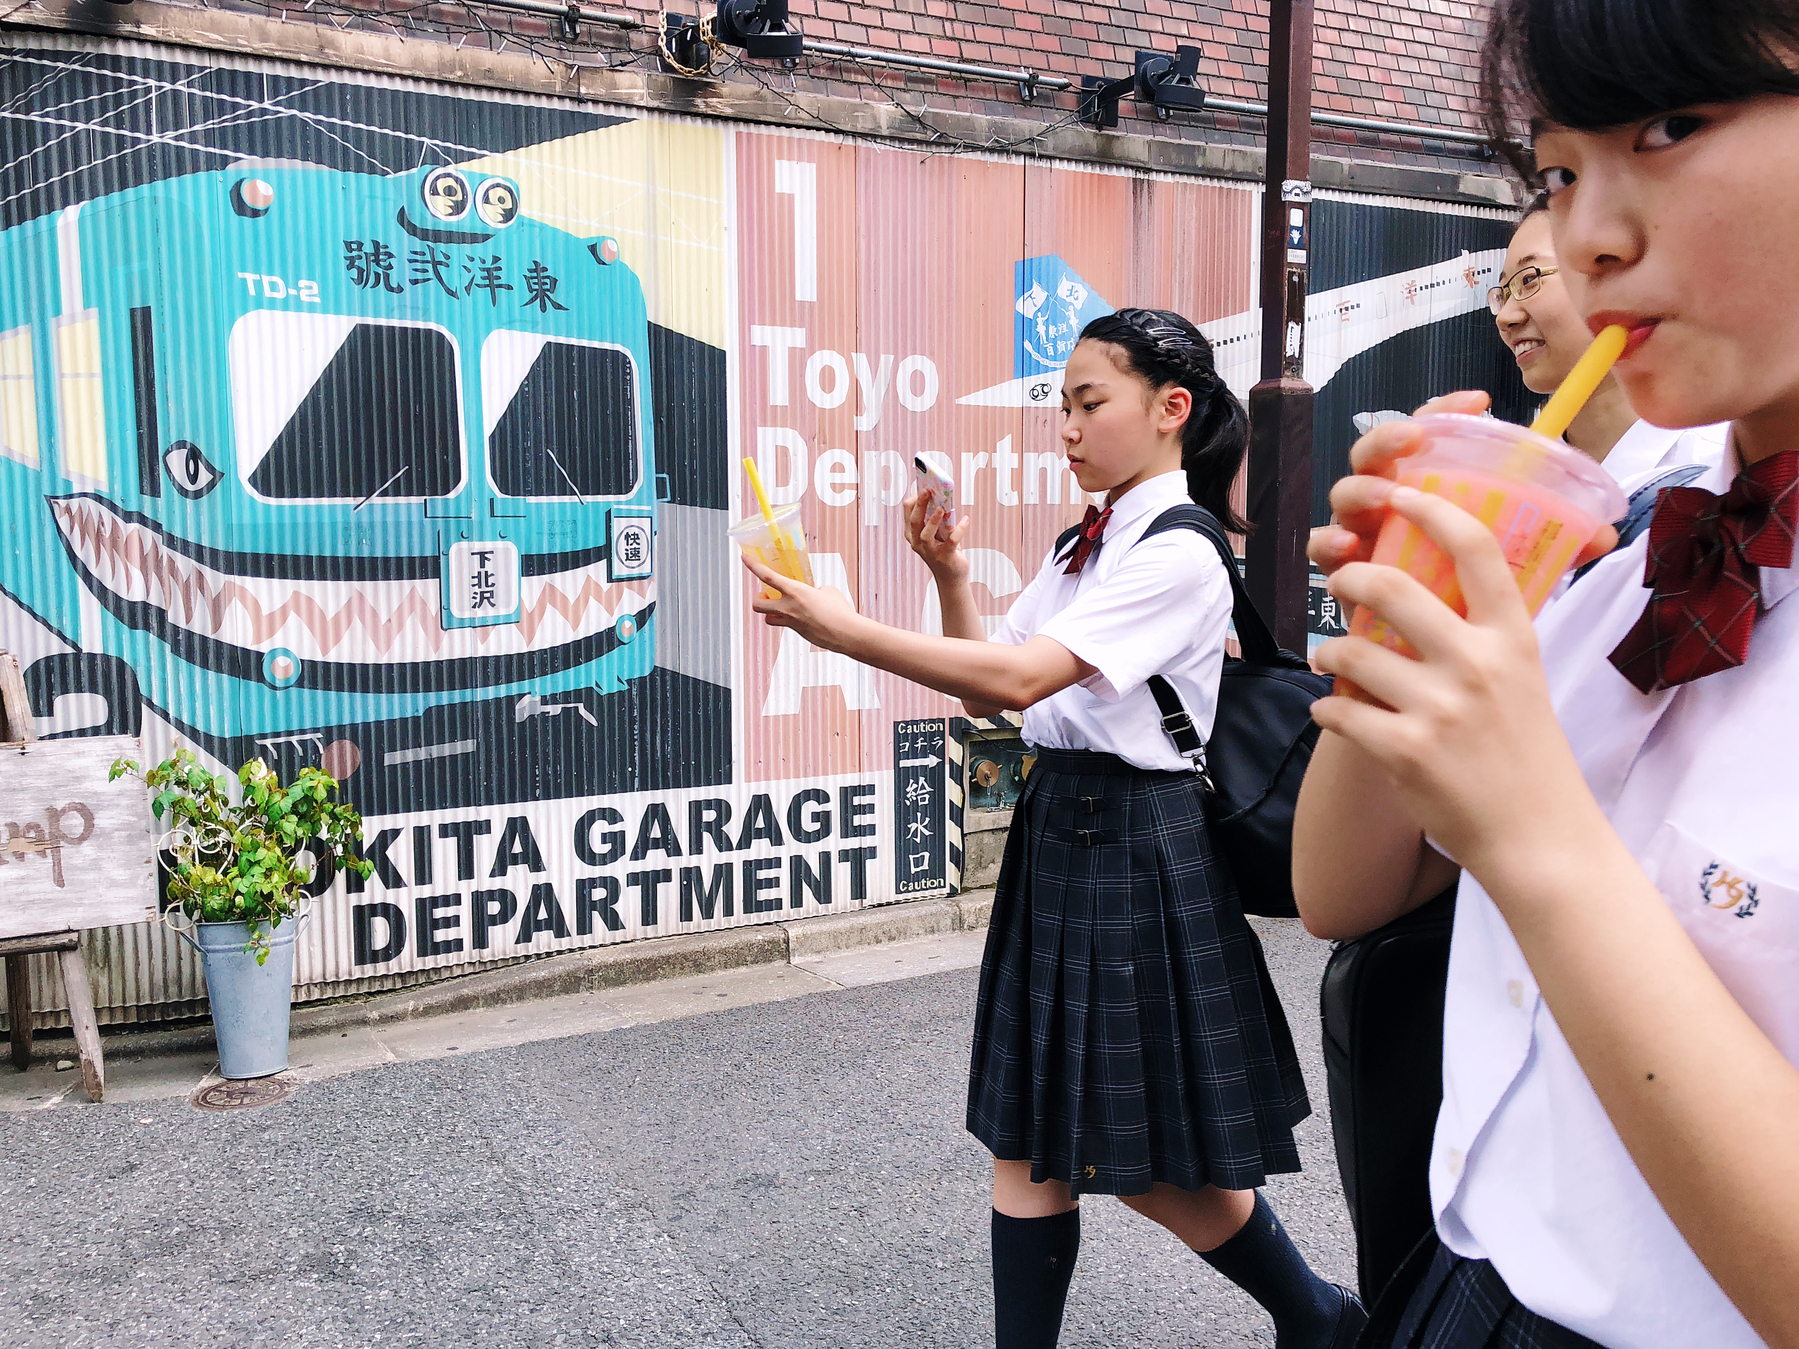 a group of girls walks into the frame from the right side. One is shooting a cup of juice she’s carrying with her cellphone. In the back a train is painted on a wall, Okita Garage Department is written below that